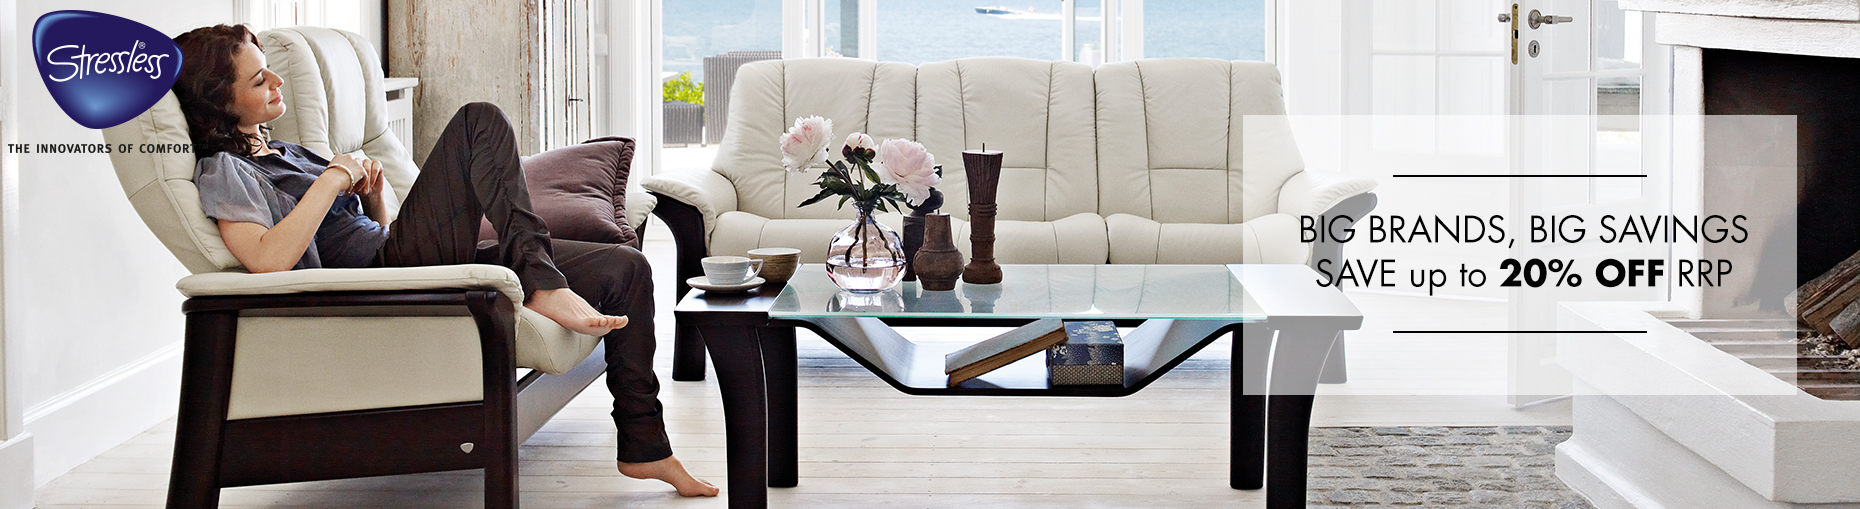 Save more from Stressless at Forrest with up to 20% off rrp.